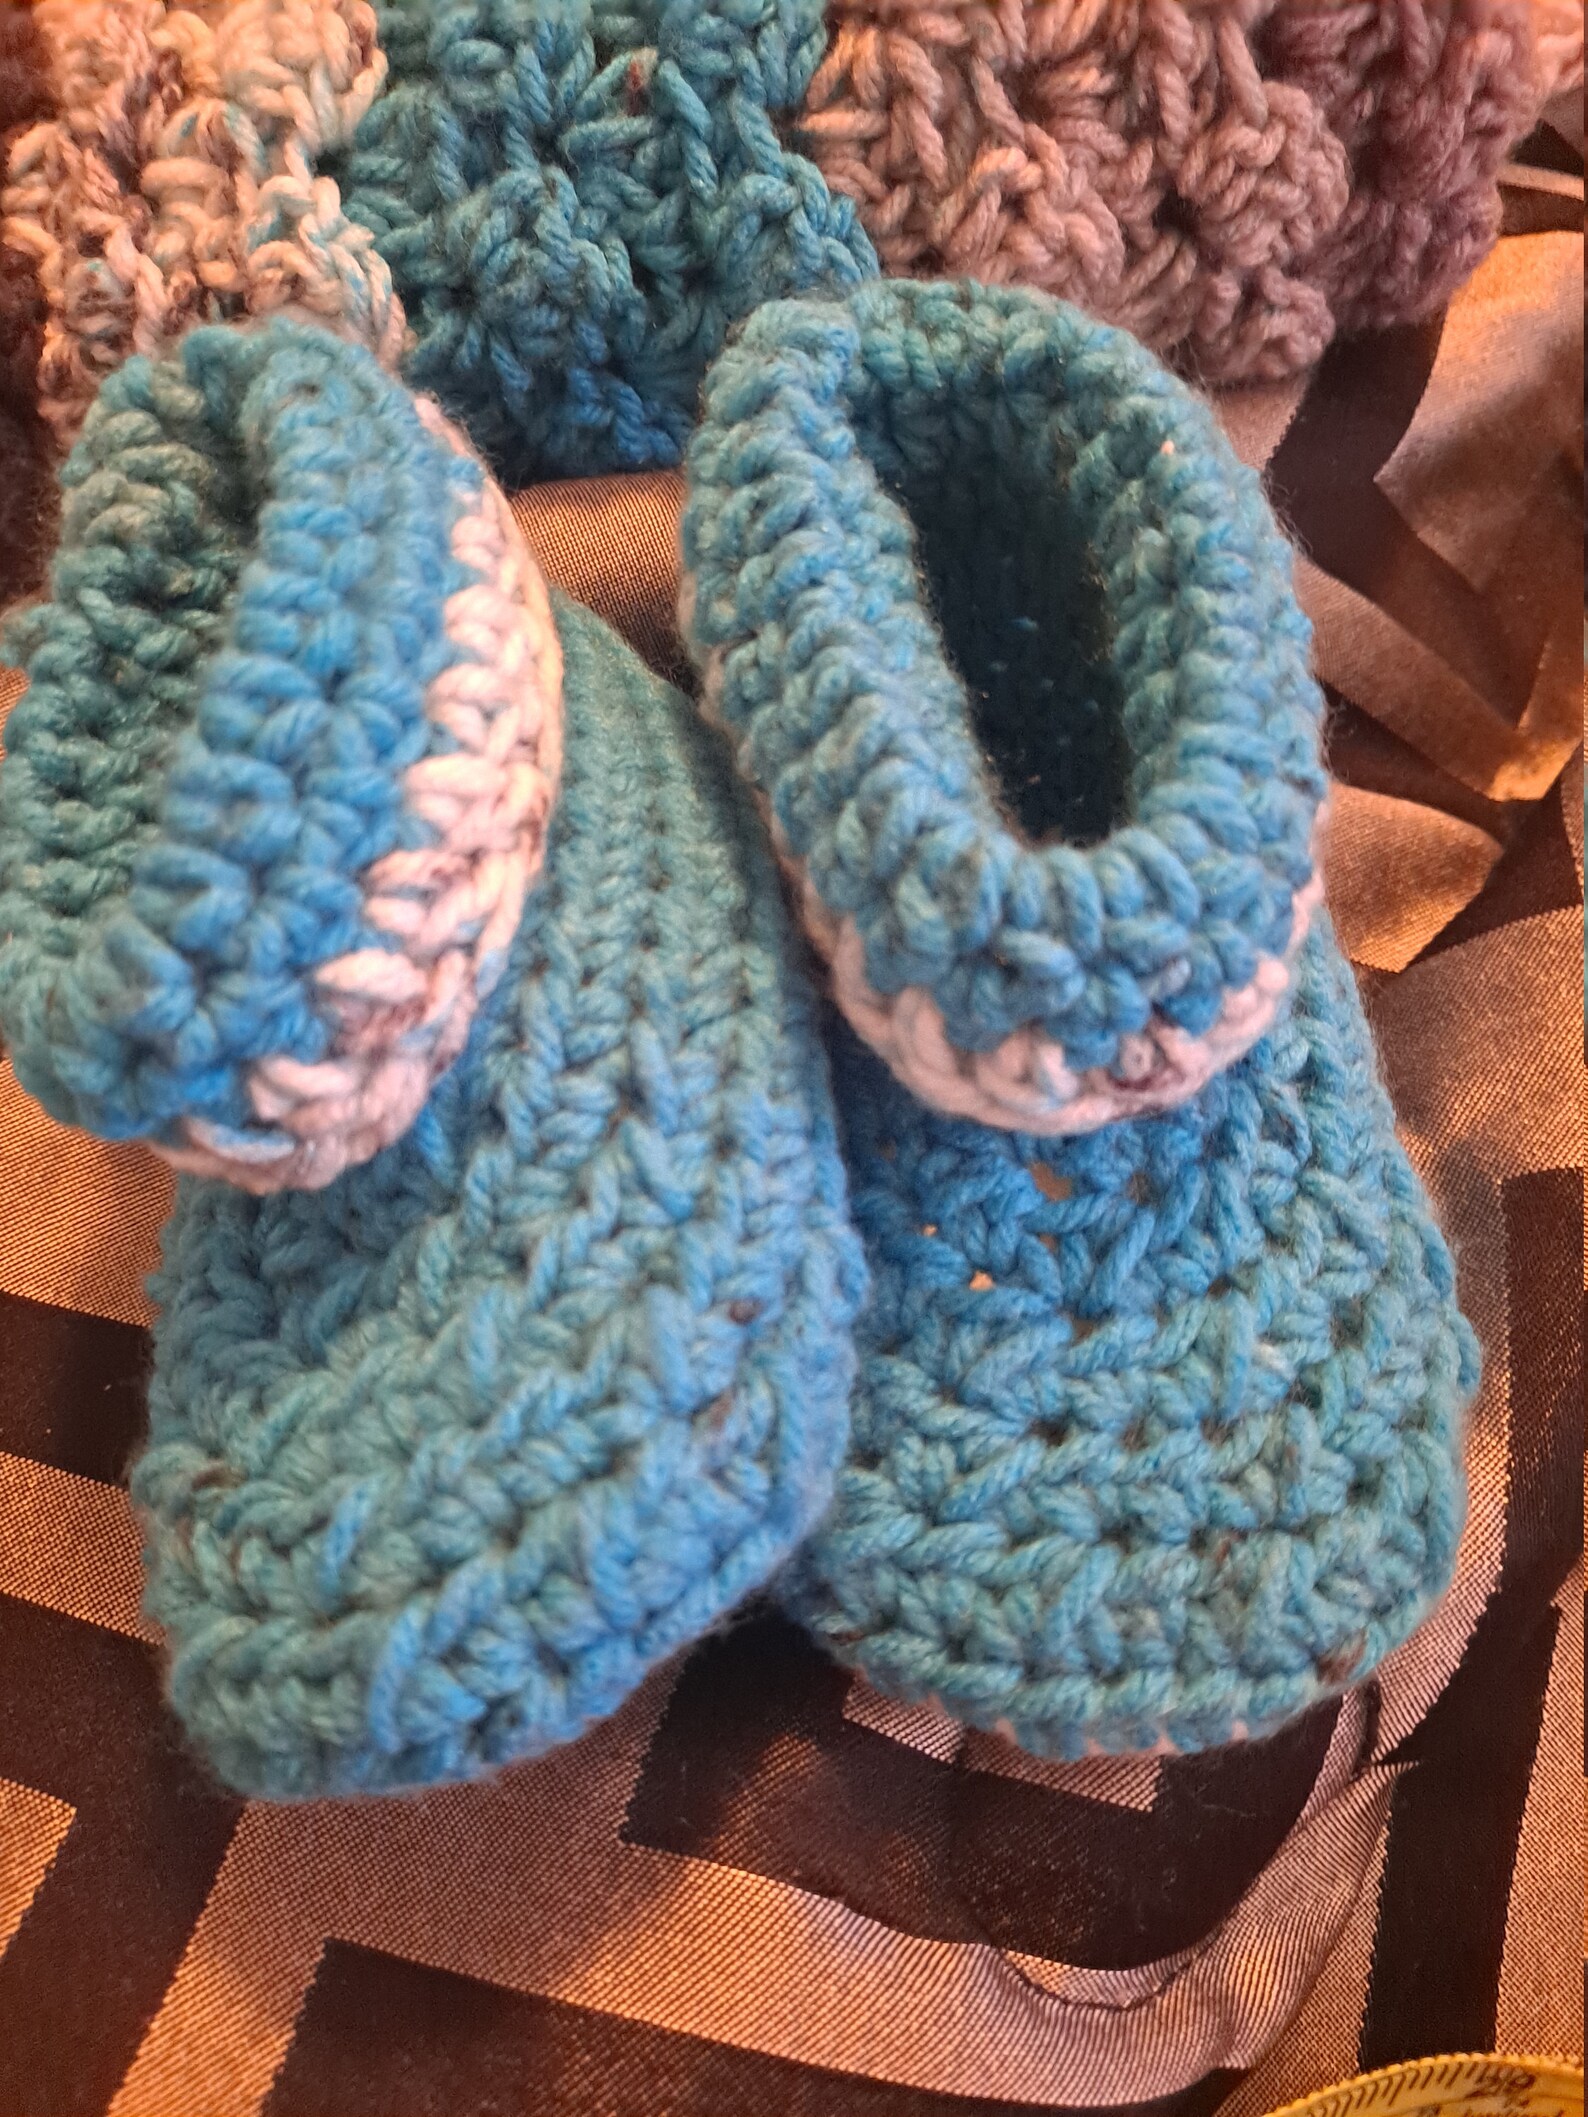 Crocheted baby blanket and booties | Etsy